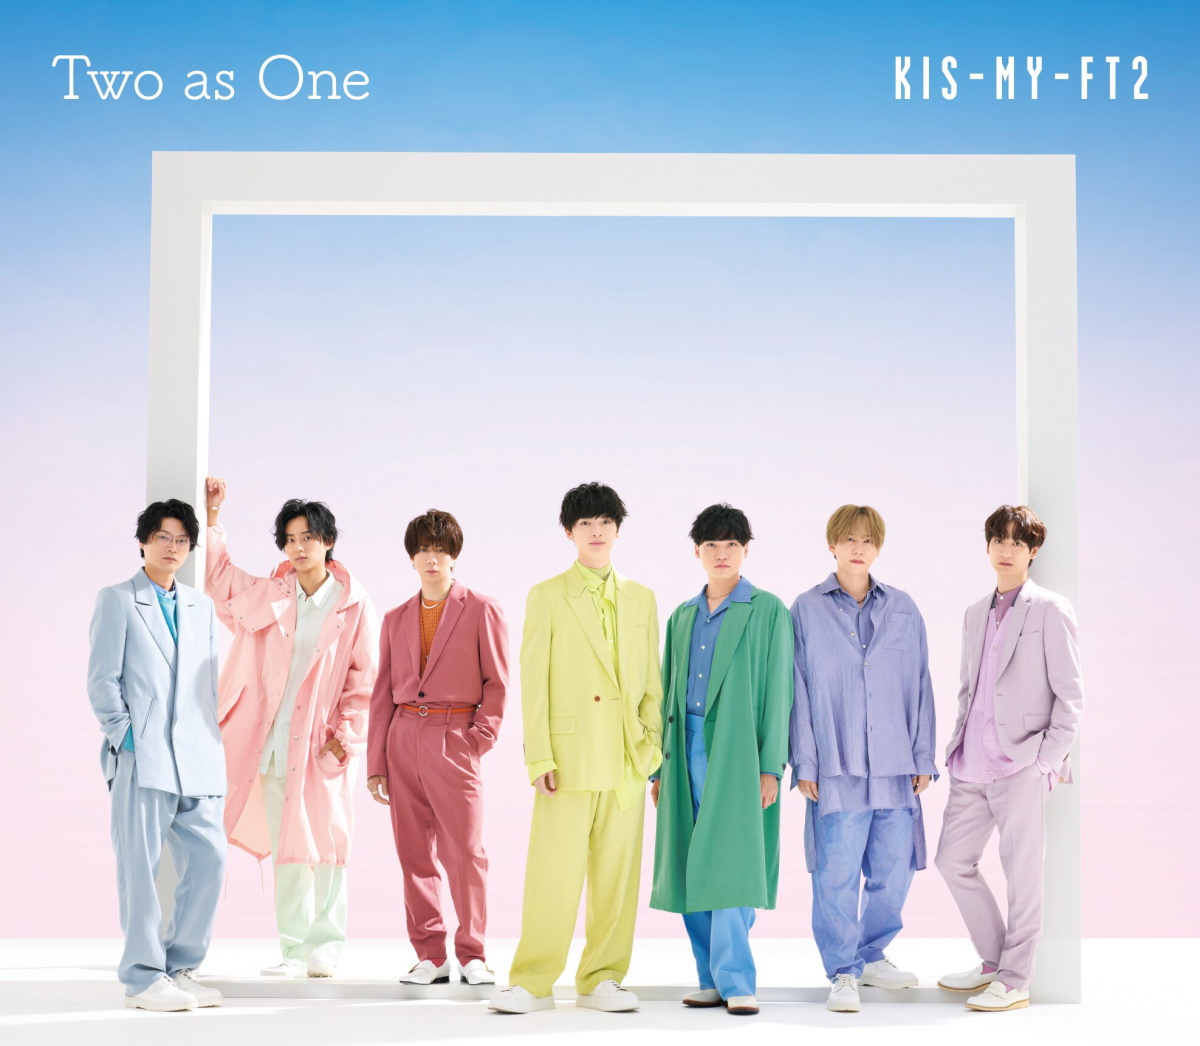 『Kis-My-Ft2 - Two as One 歌詞』収録の『Two as One』ジャケット